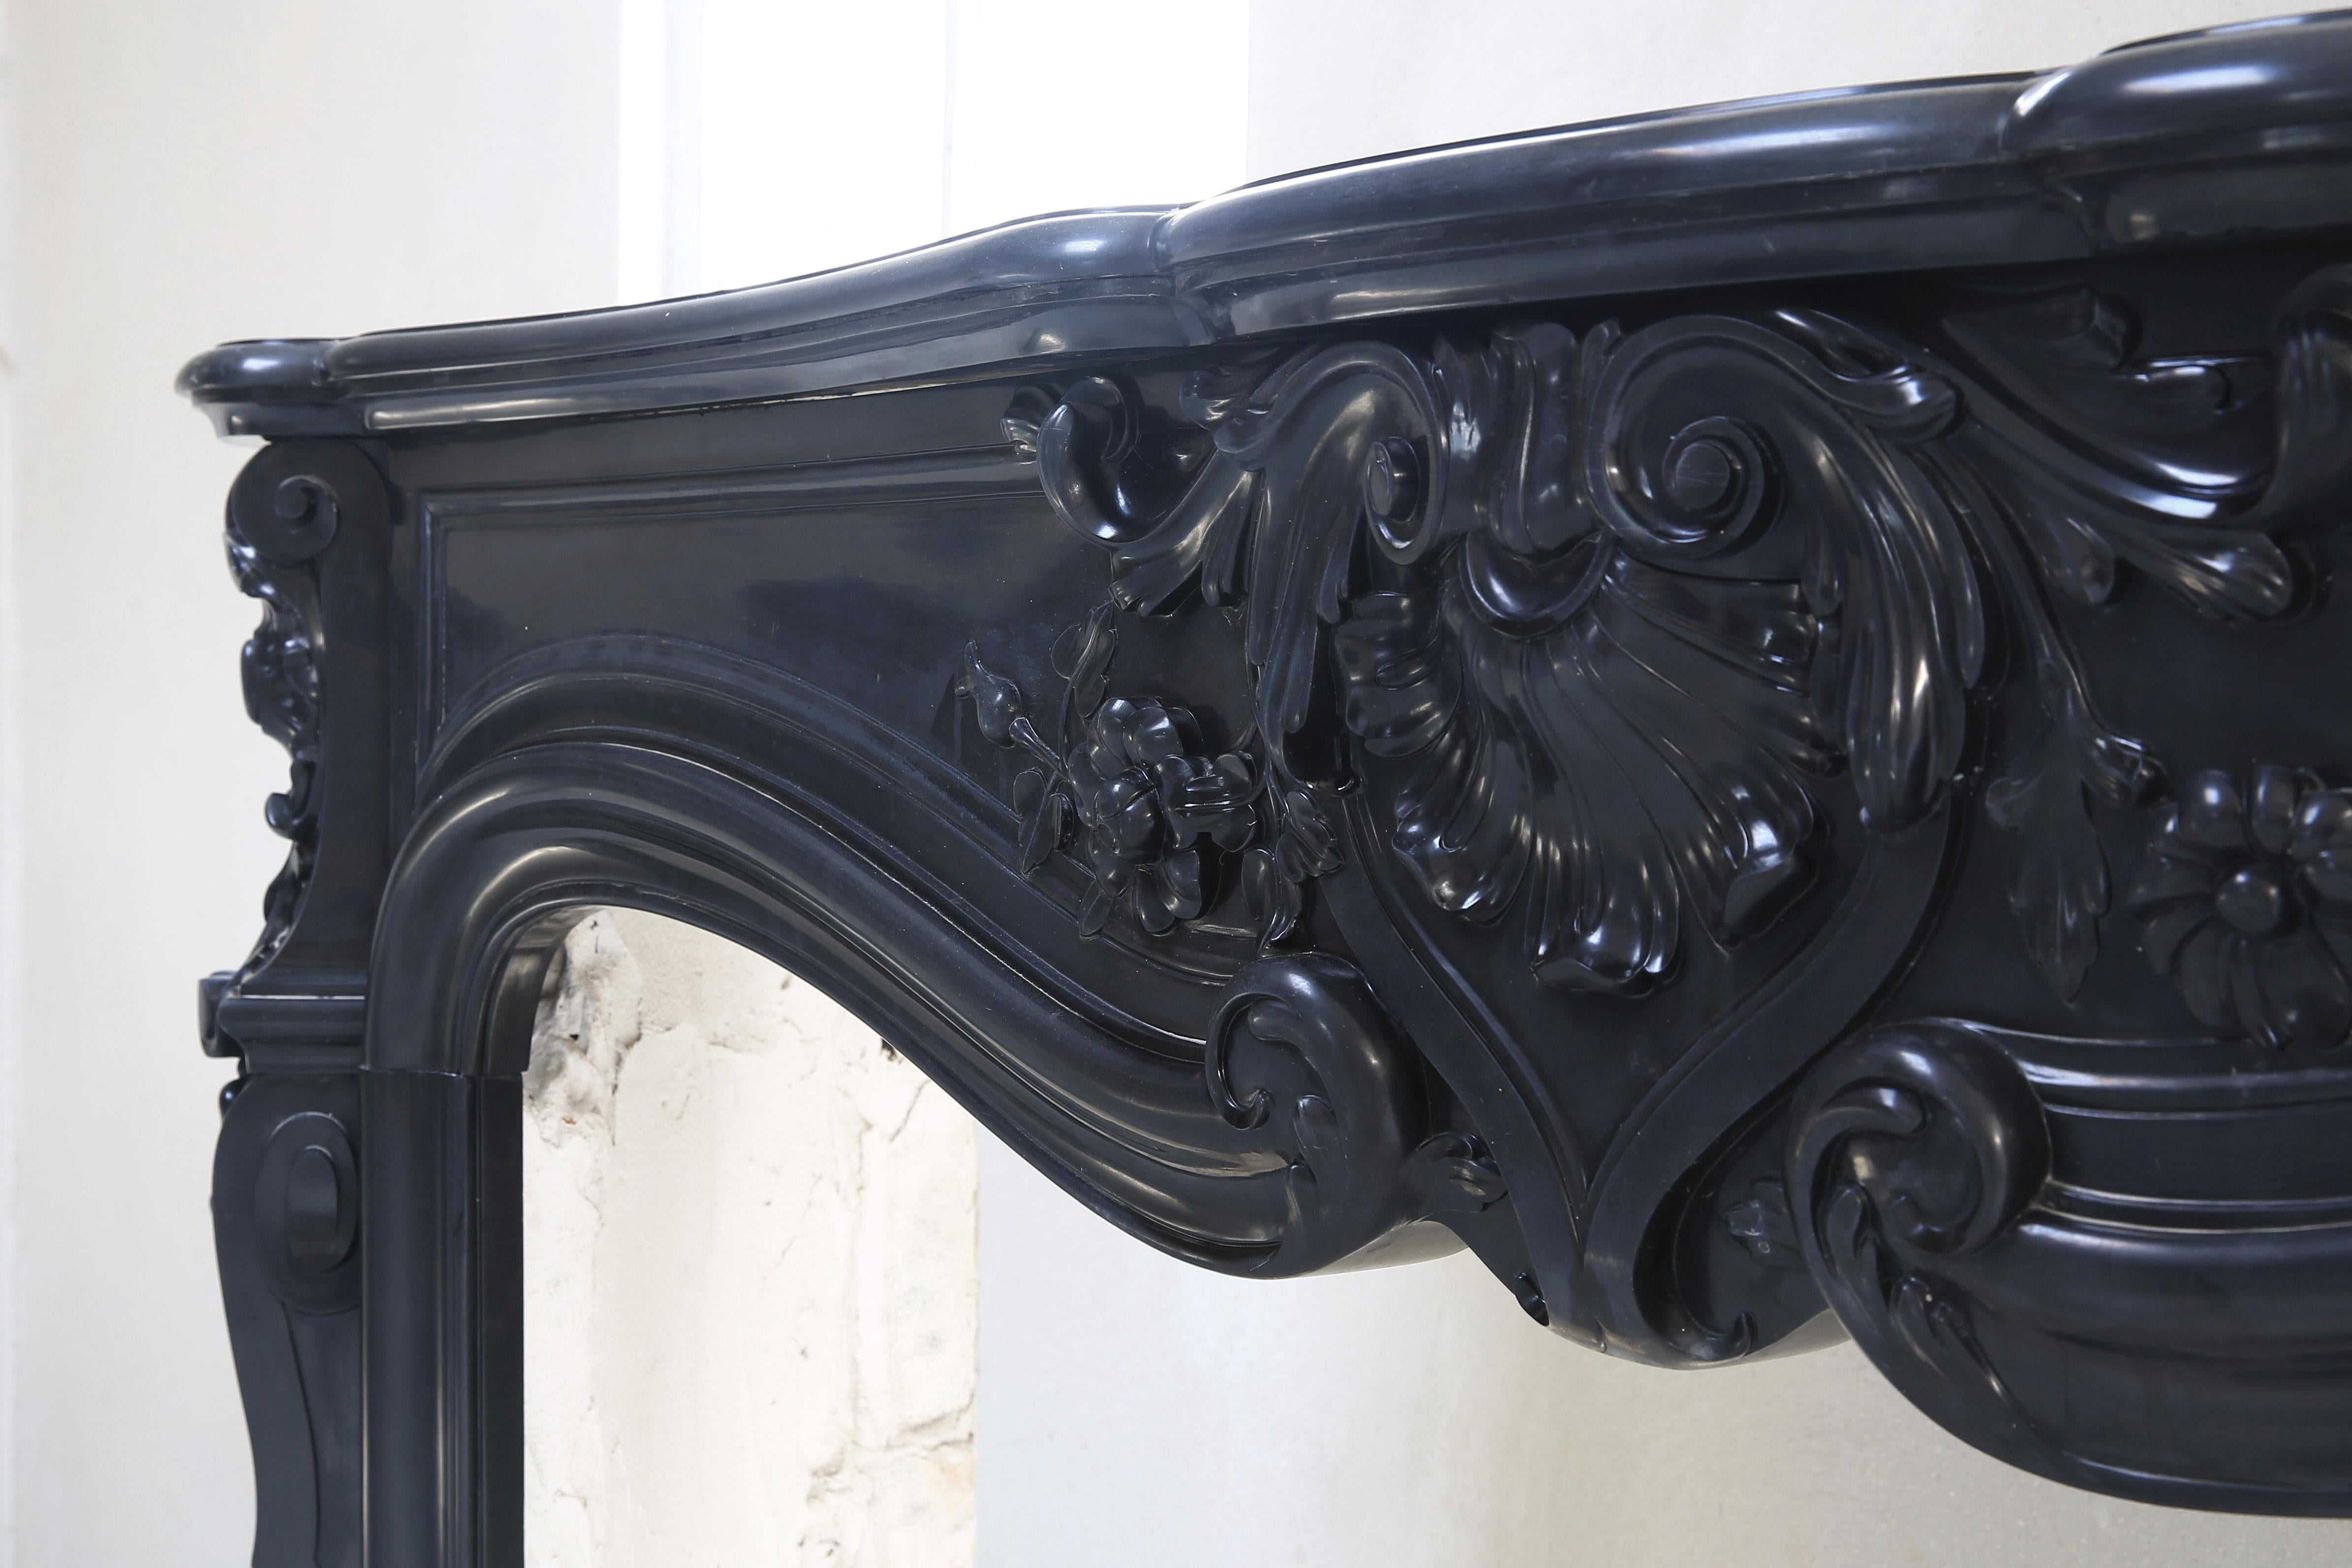 A beautiful 'Noir de Mazy' fireplace. Noir de Mazy is black marble and comes from Belgium. This type of marble is becoming increasingly rare, because the quarries in Belgium are almost closed. This mantelpiece dates from the 19th century and is in